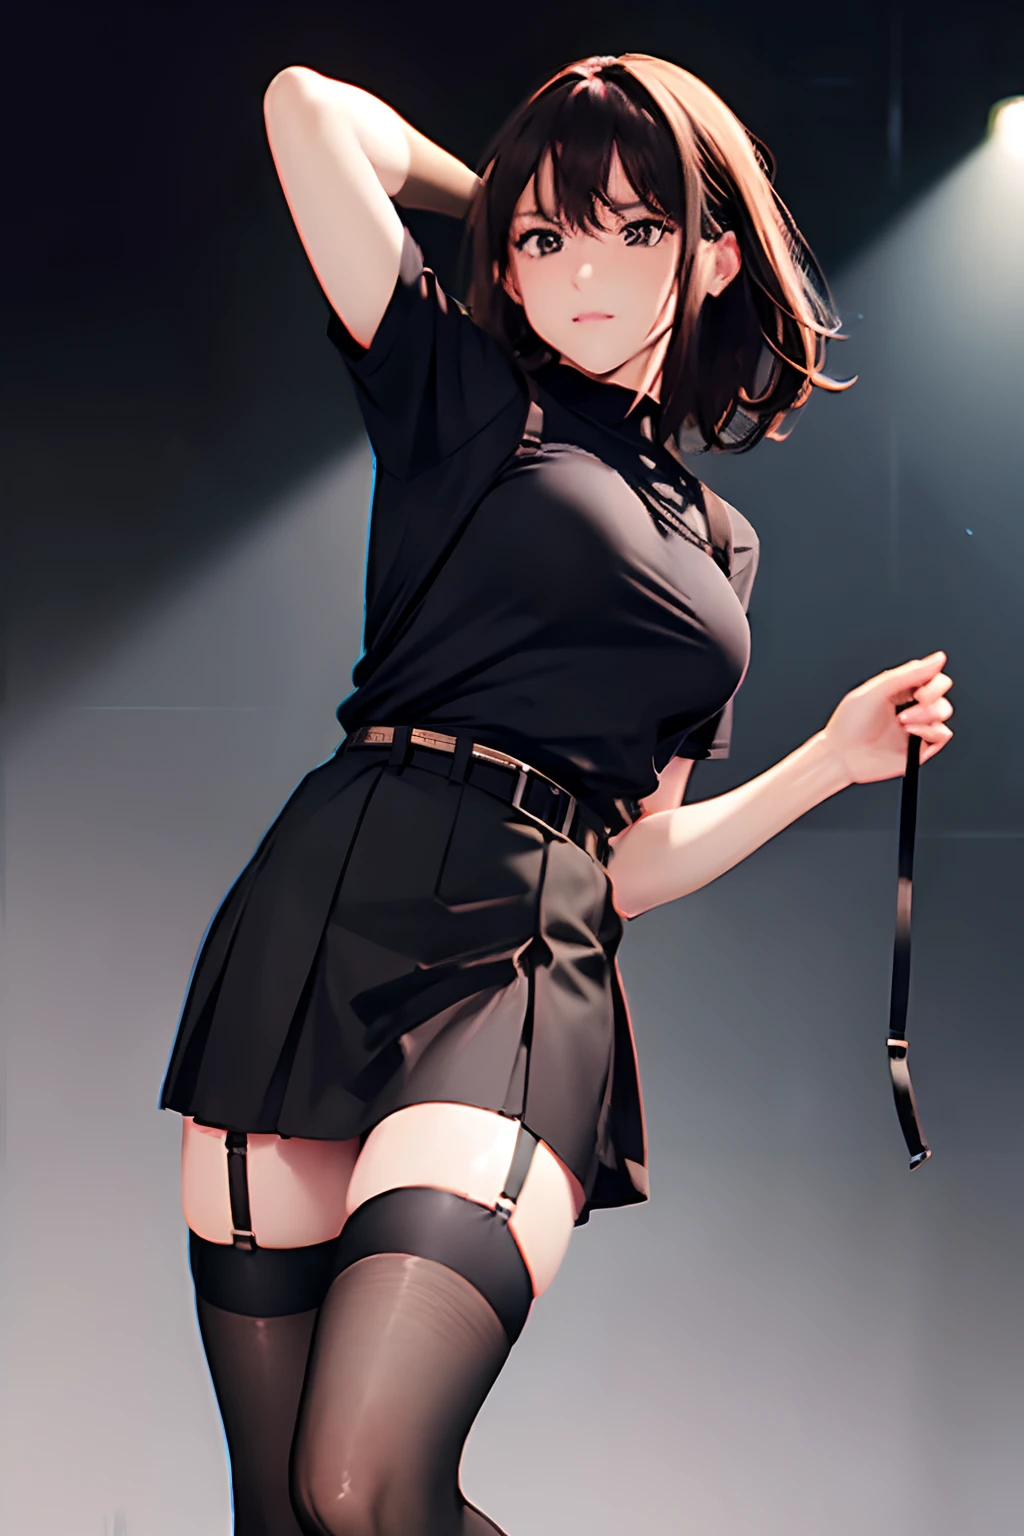 Black skirt, 　suspenders, Brown hair Gray eyes, Garter belt on the legs, Tight black clothes, 　　 a belt　Armpit sweat　　Dark look　Moderately breasts　holster　chain　　poneyTail　Water wetting